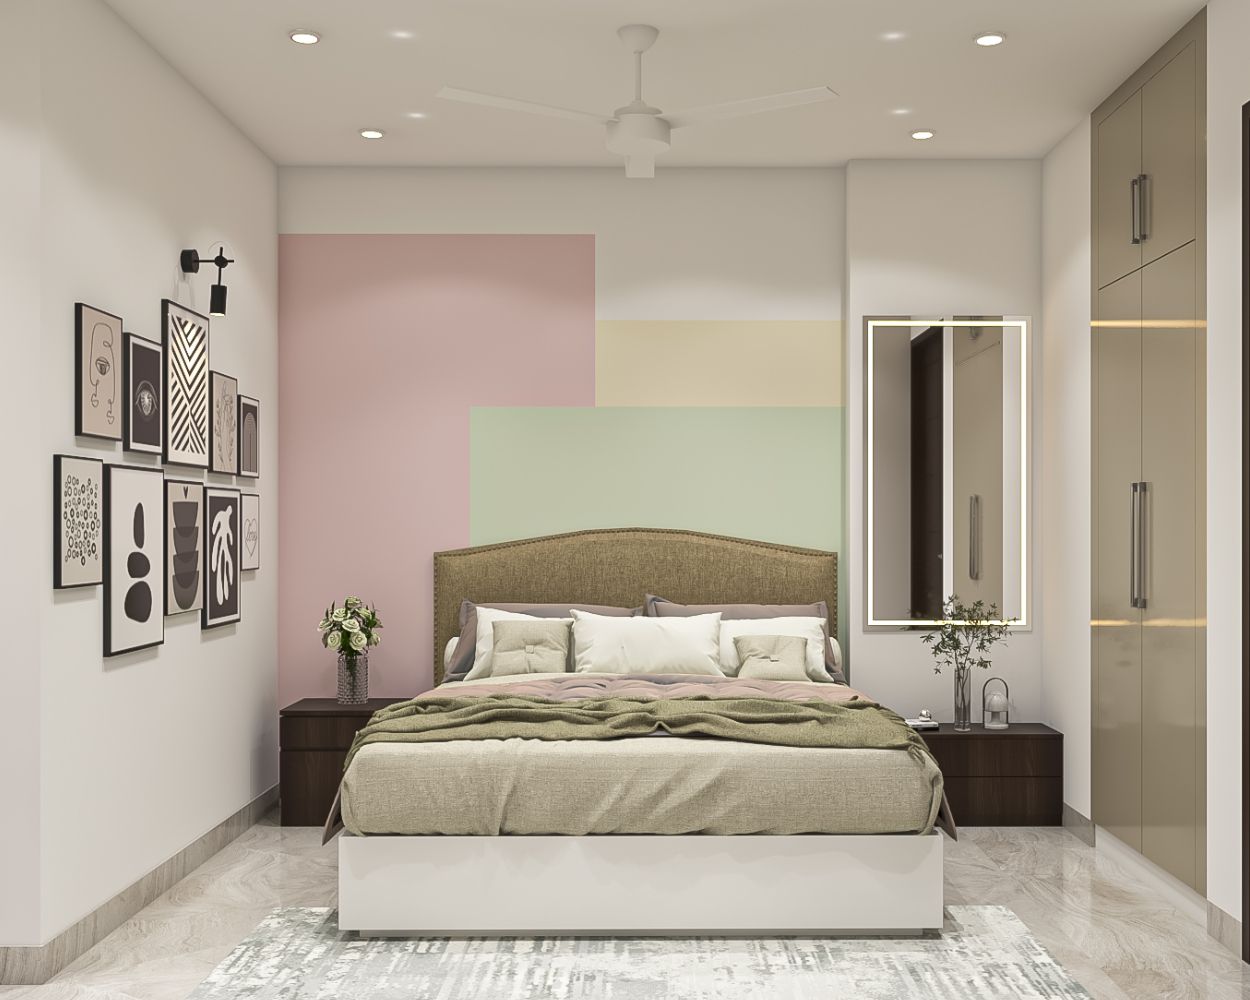 Contemporary Guest Room Design With Tri-Toned Accent Wall And Light Brown Bed